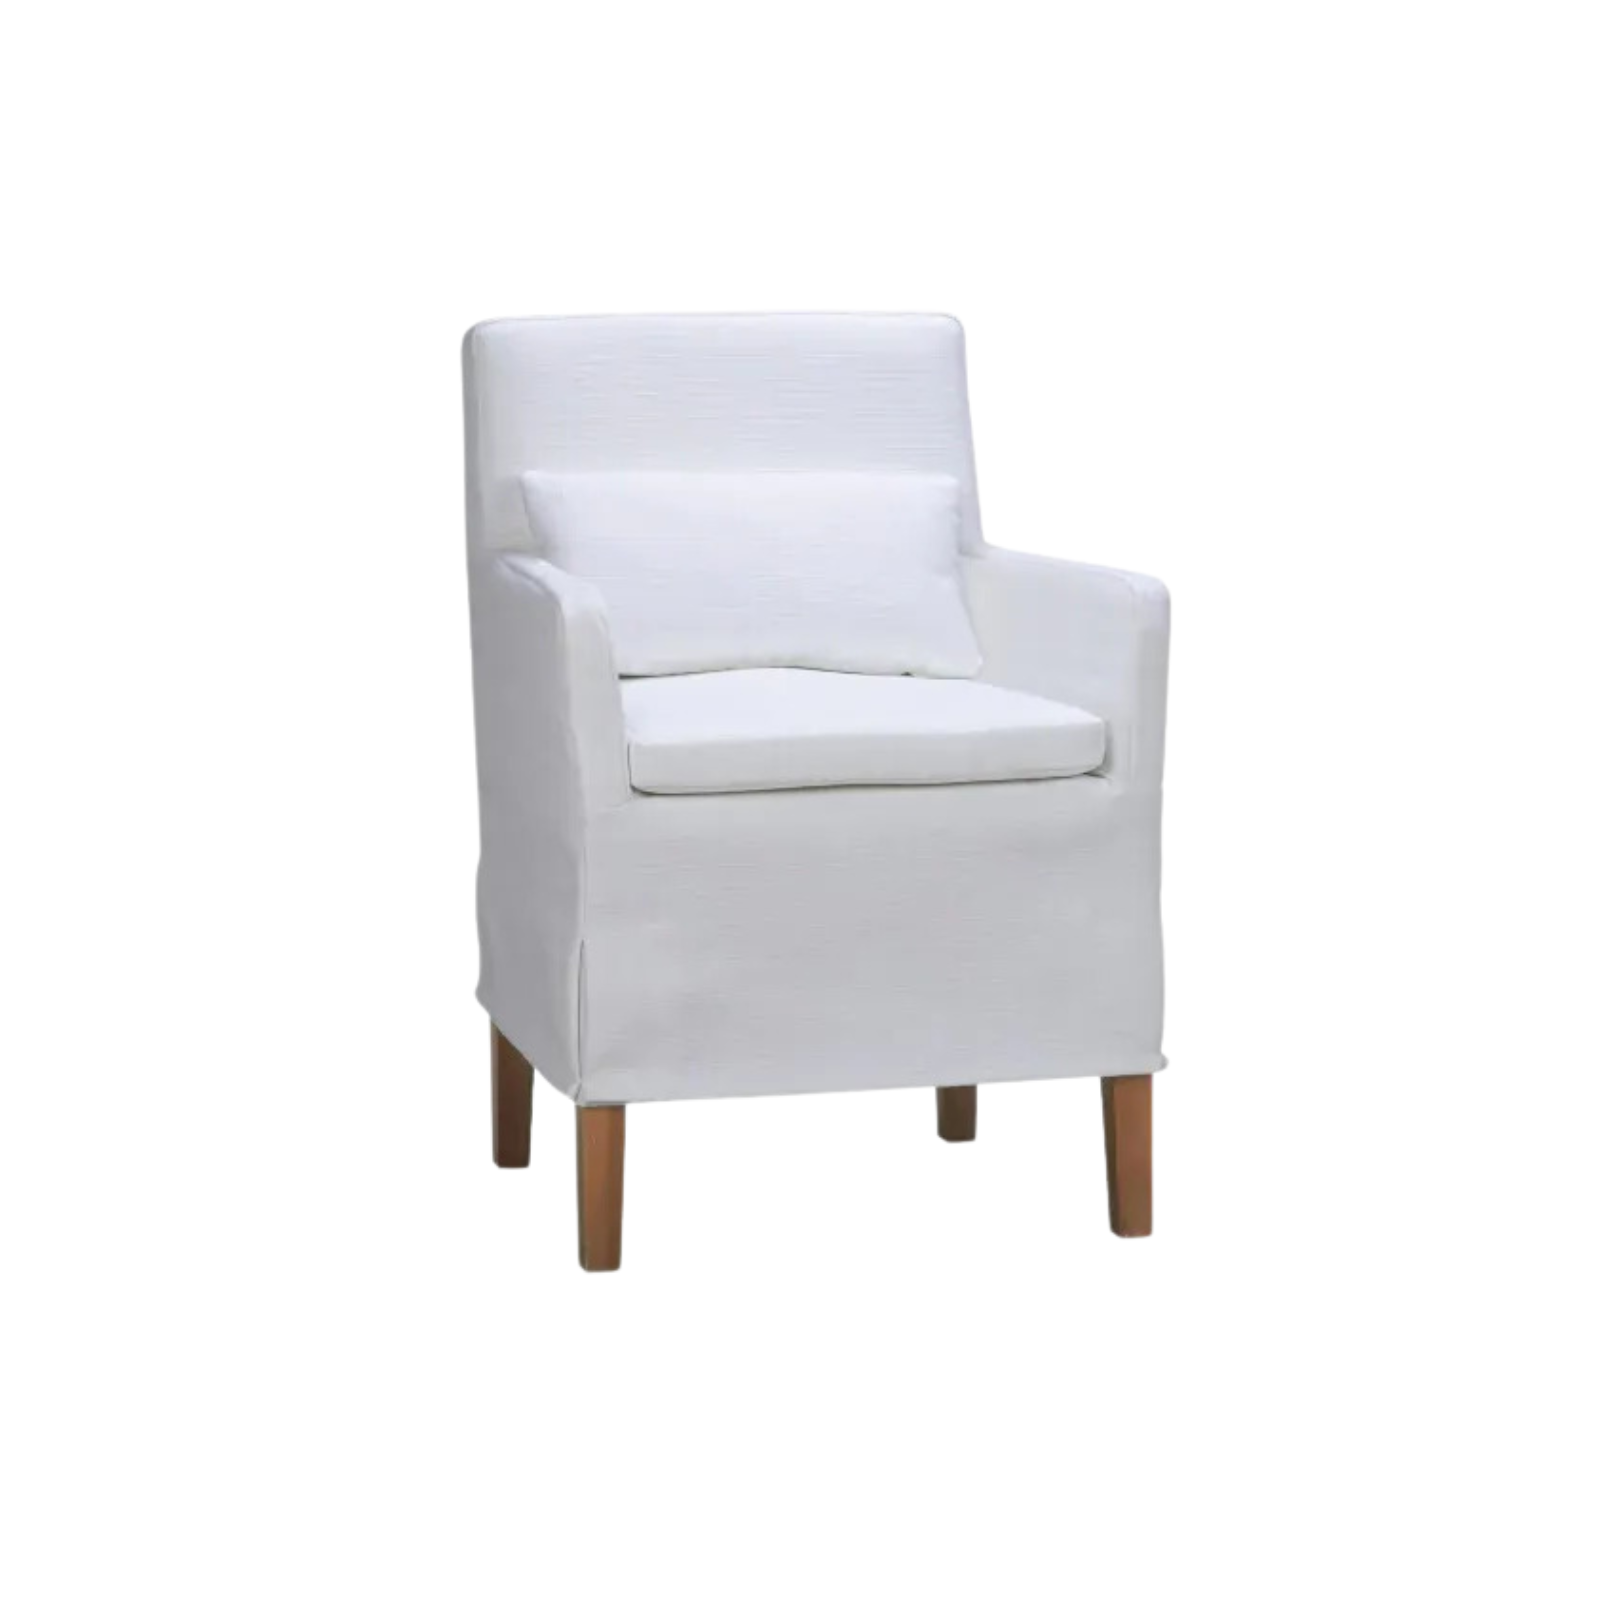 Beau Dining Chair - Rug & Weave